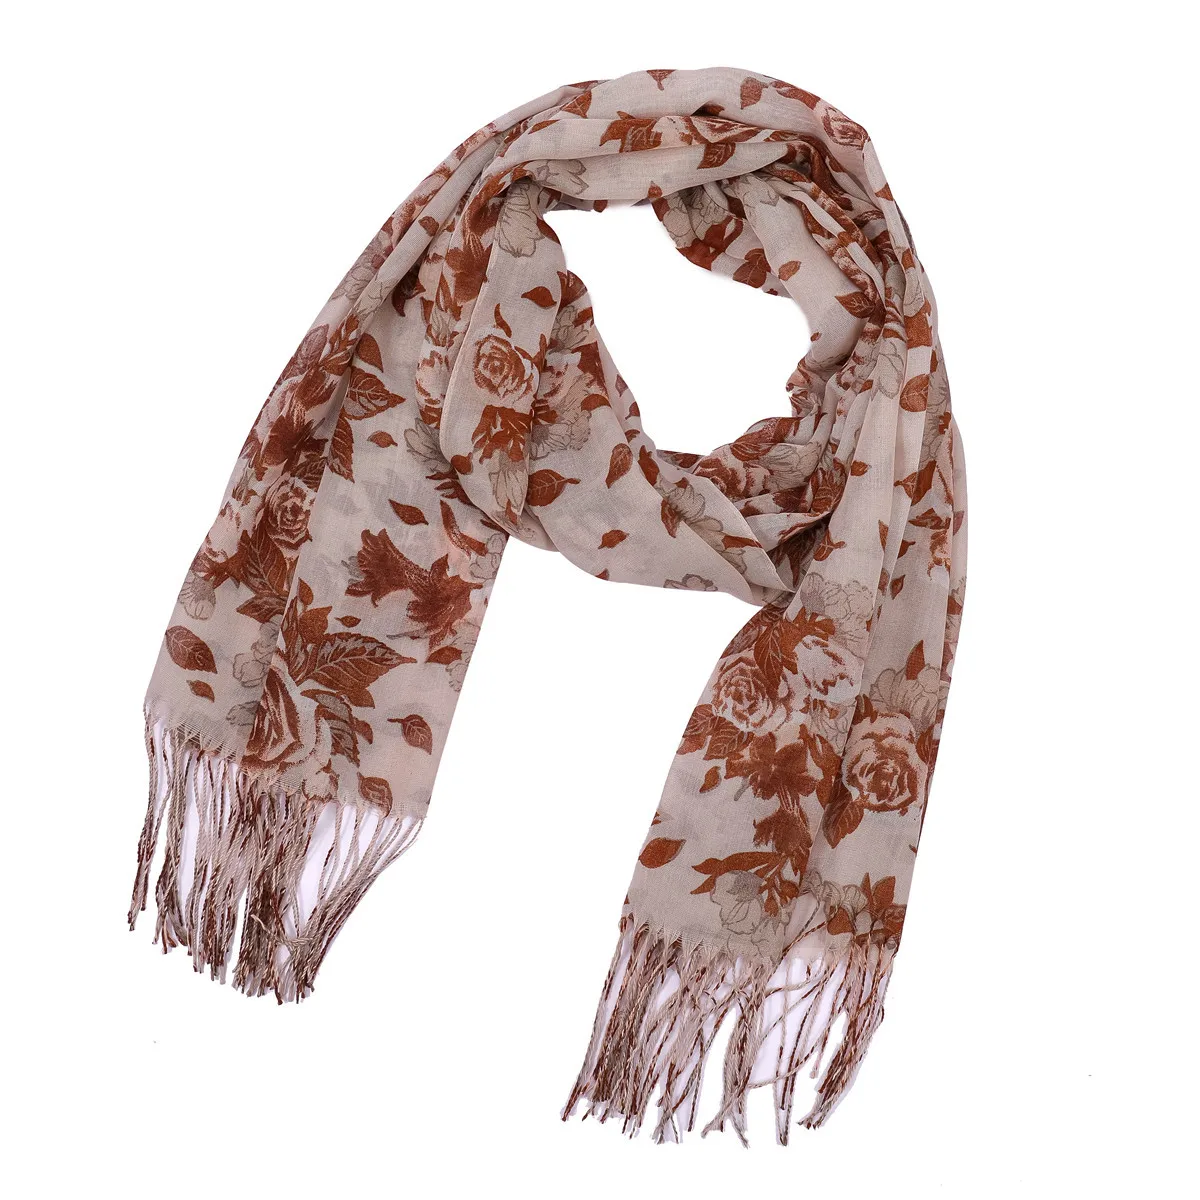 

Ethnic Floral Leaves Embellished Light Cotton Hemp Scarf Travel Photo Small Shawl Multi-color Optional